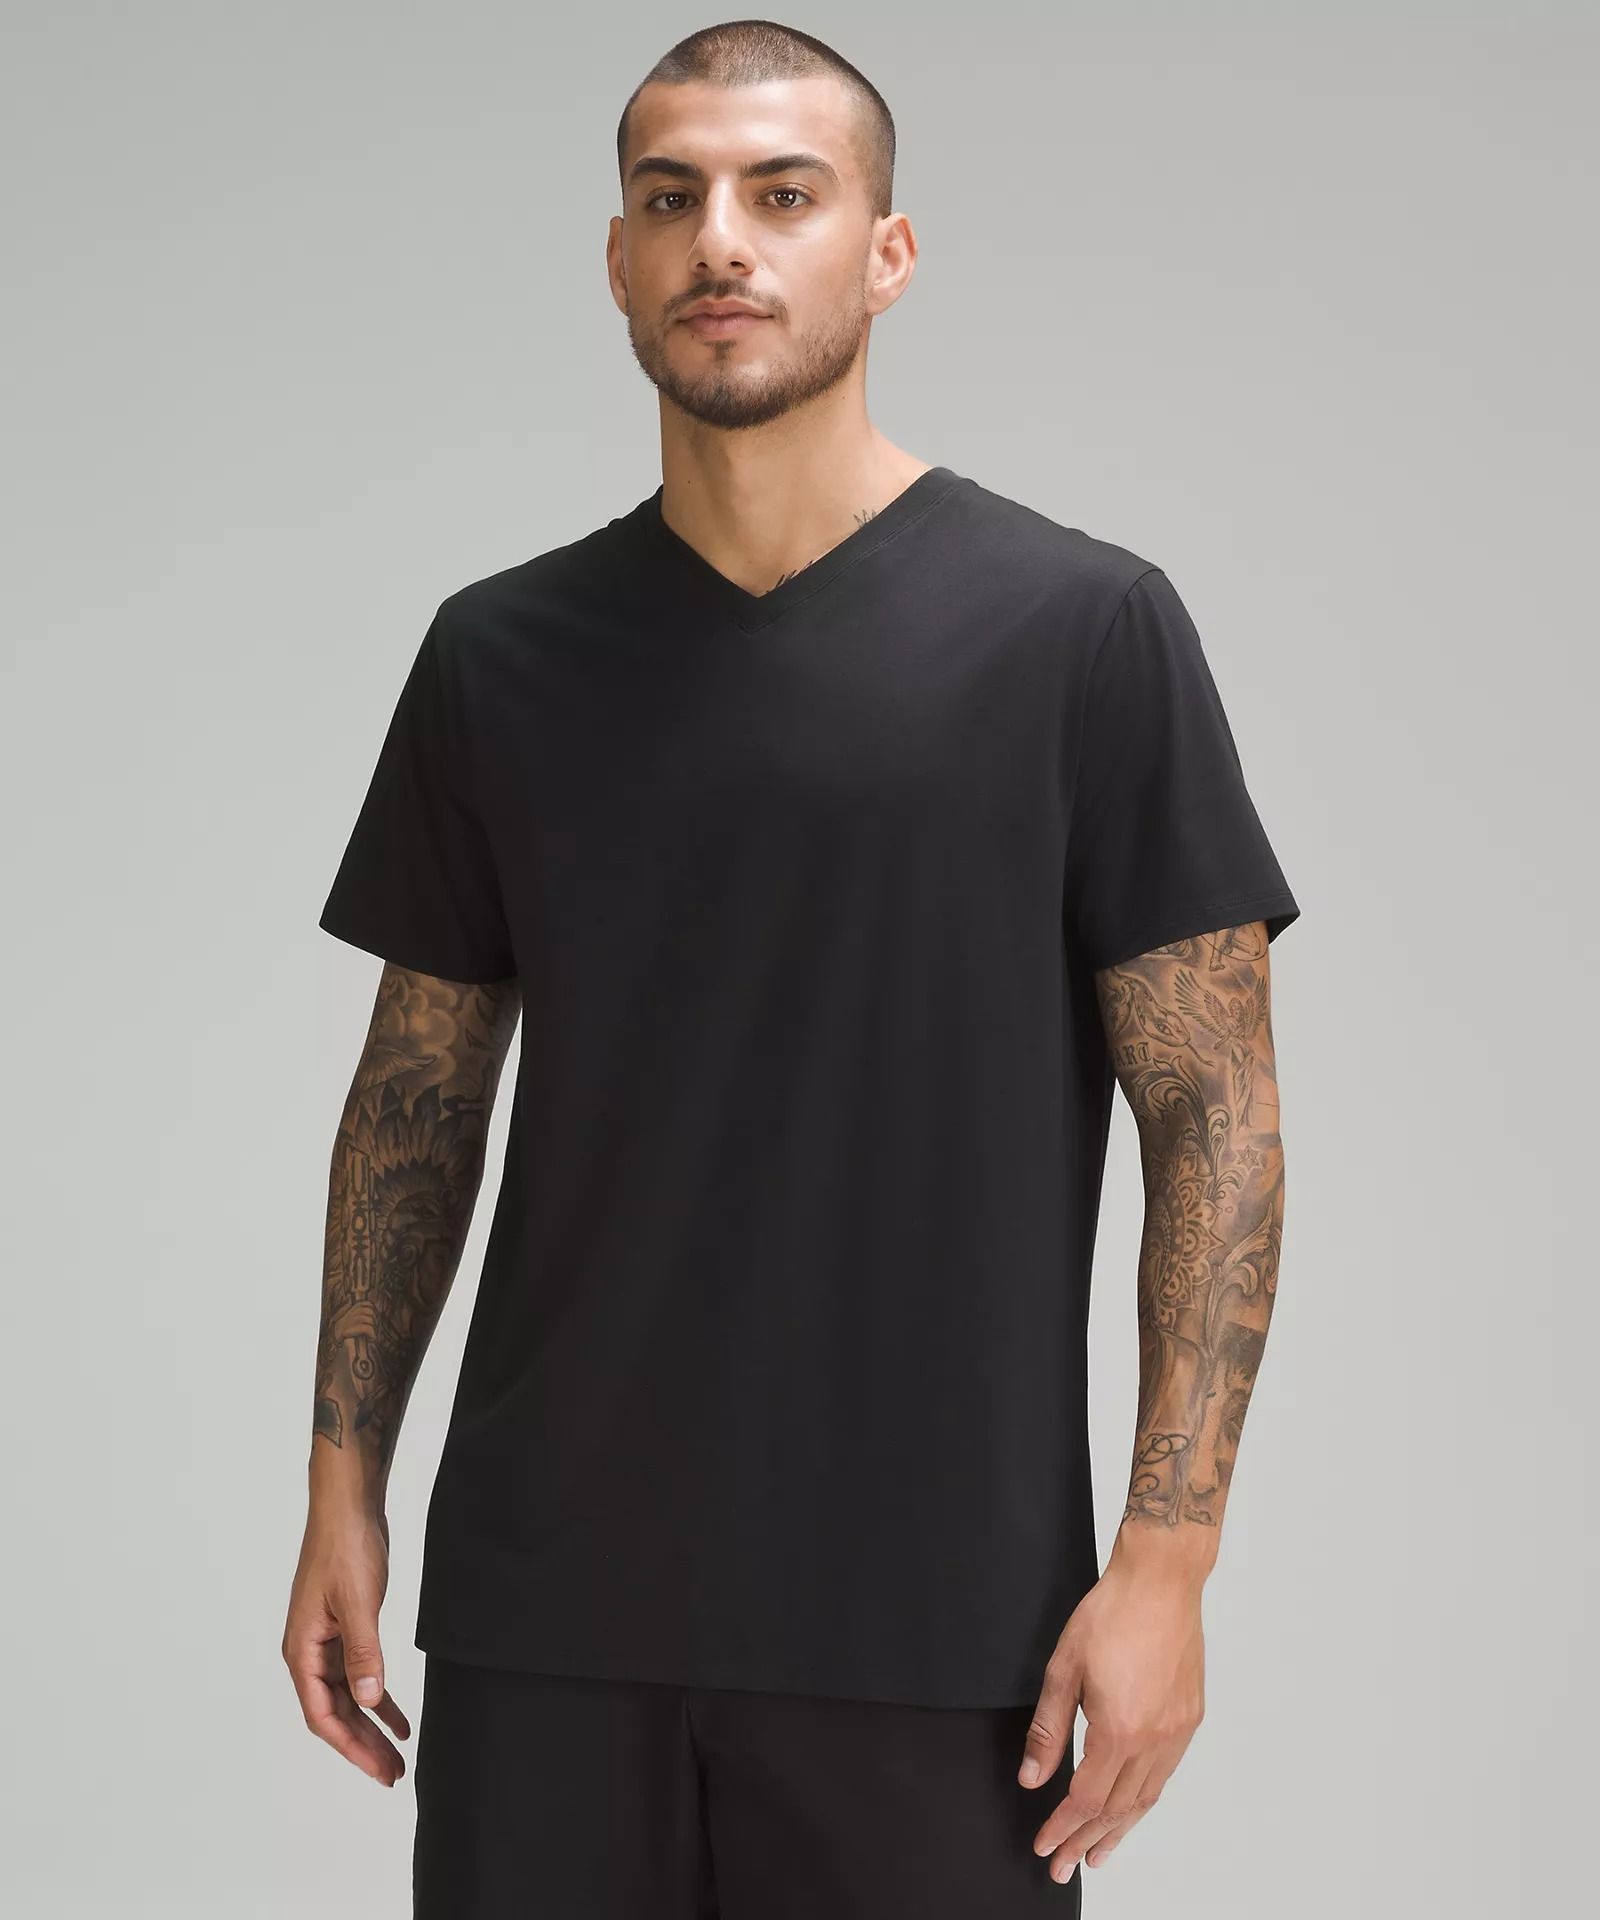 Found: V-Neck T-Shirts That Look and Feel Amazing